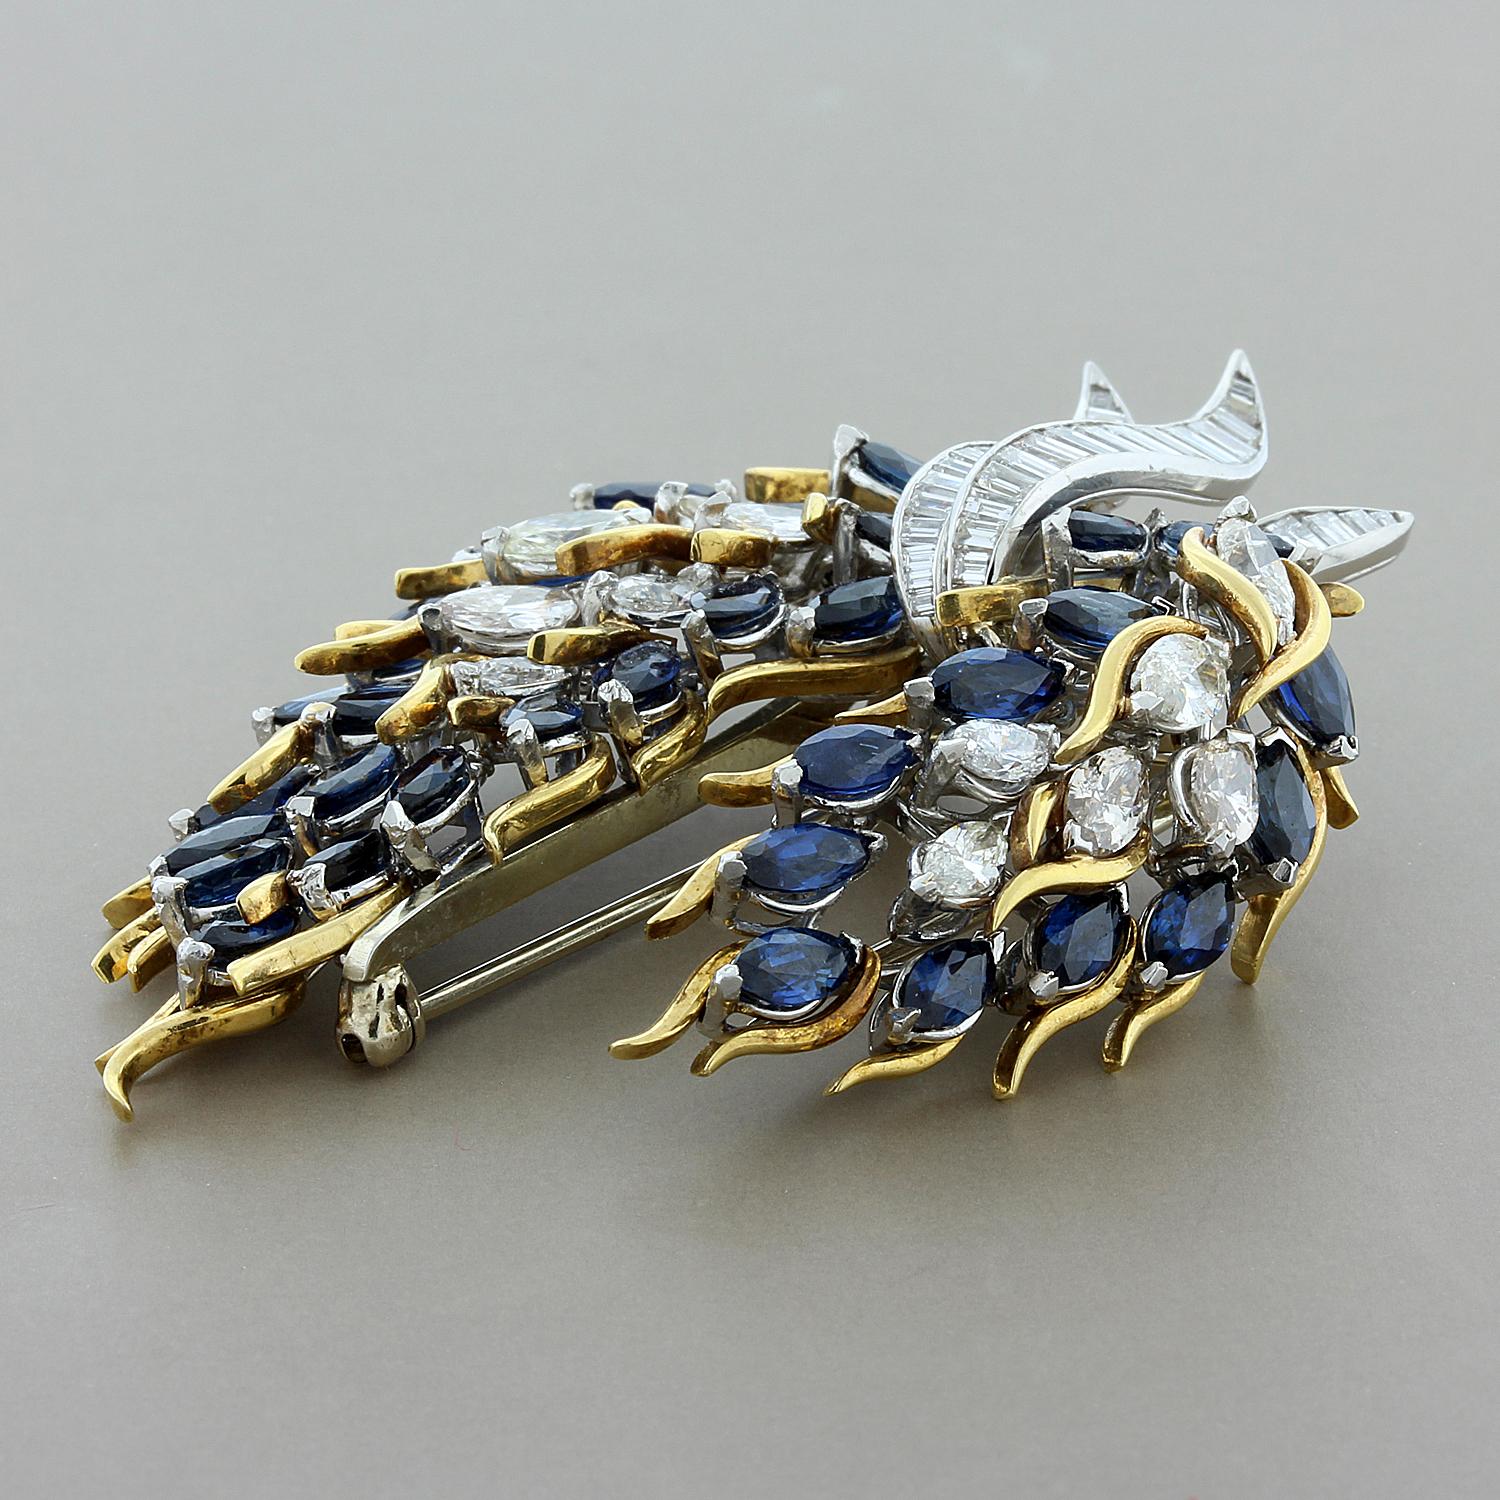 An estate piece, very unique in style. It features approximately 10.00 carats of blue sapphire and 5.00 carats of brilliant white diamonds. The brooch has a flexible design allowing it to fit perfectly with all attire. A truly fine piece of jewelry